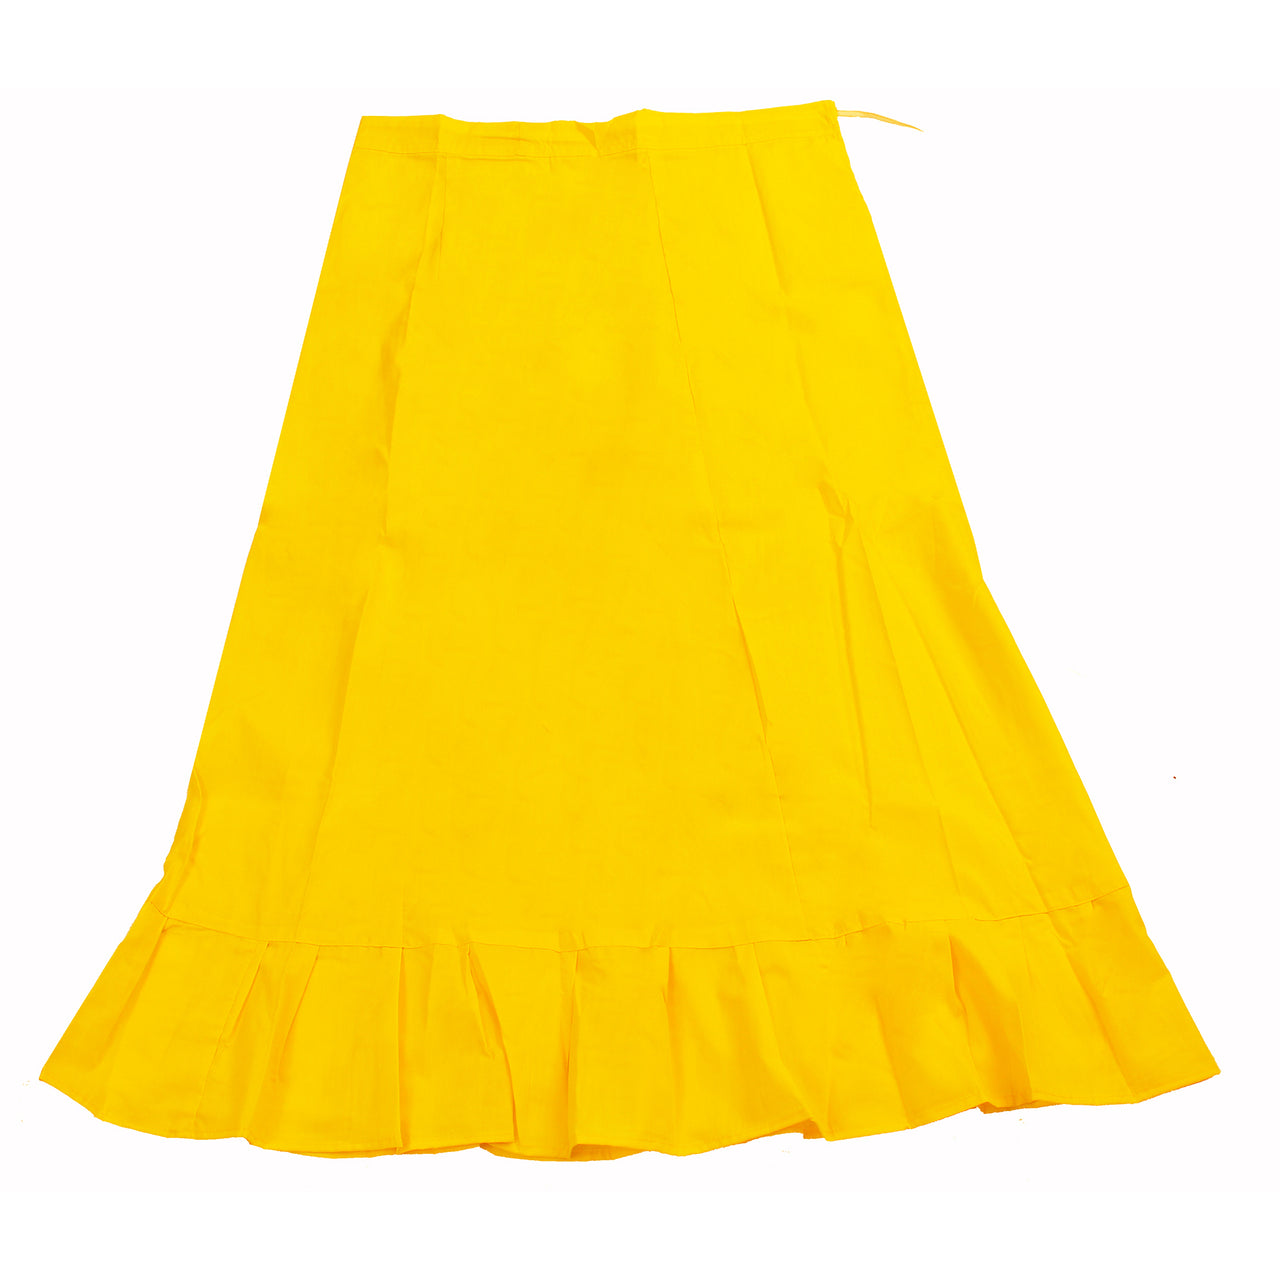 Yellow - Sari (Saree) Petticoat - Available in S, M, L & XL - Underskirts For Sari's